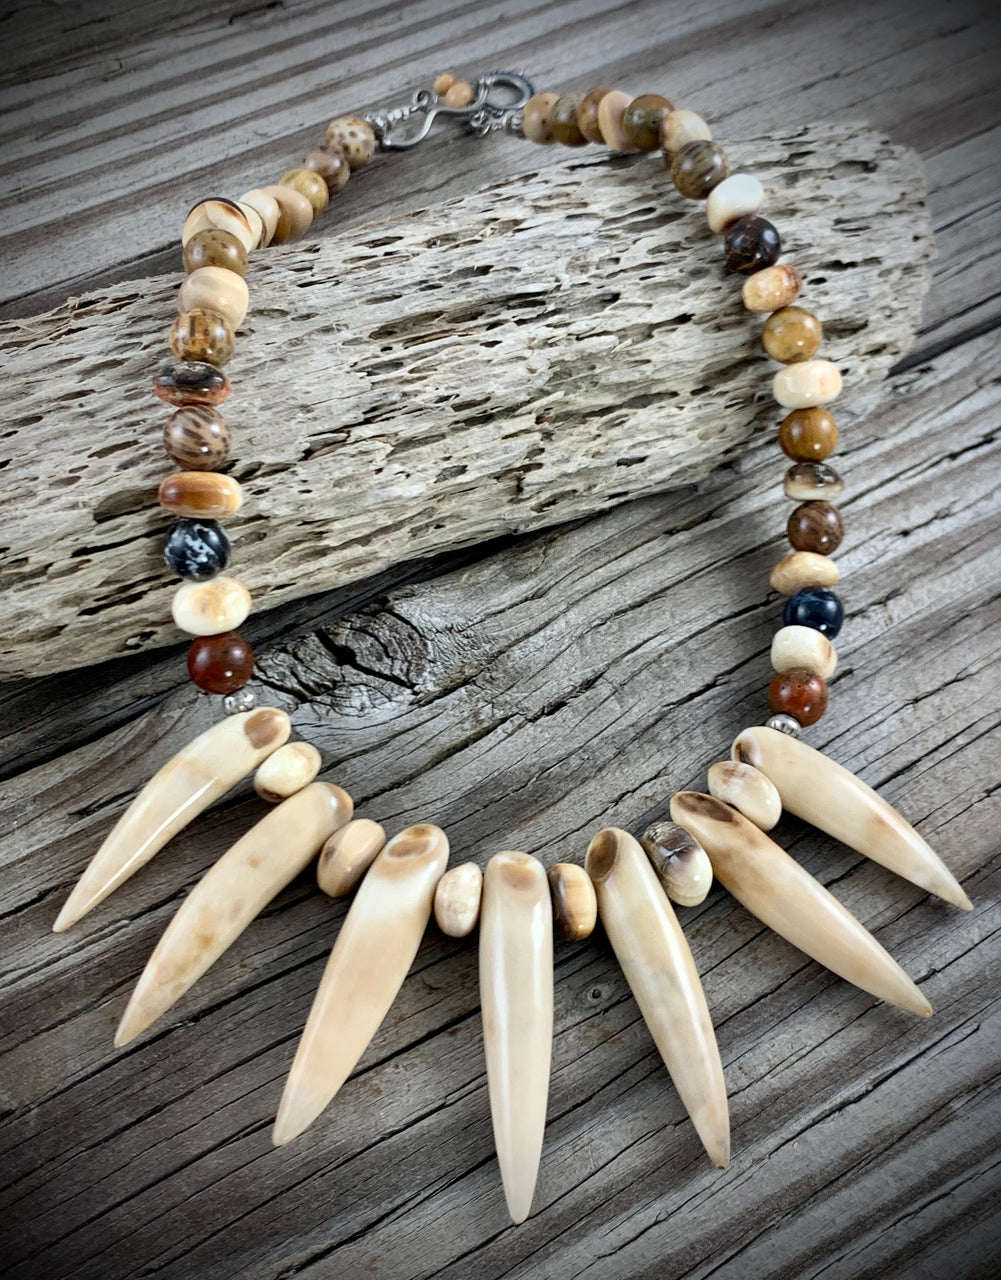 Tiger Teeth Resin Silver Elephant Adjustable Men Necklace Leather Beach  Boho Fang 19 to 29 Inches | Amazon.com